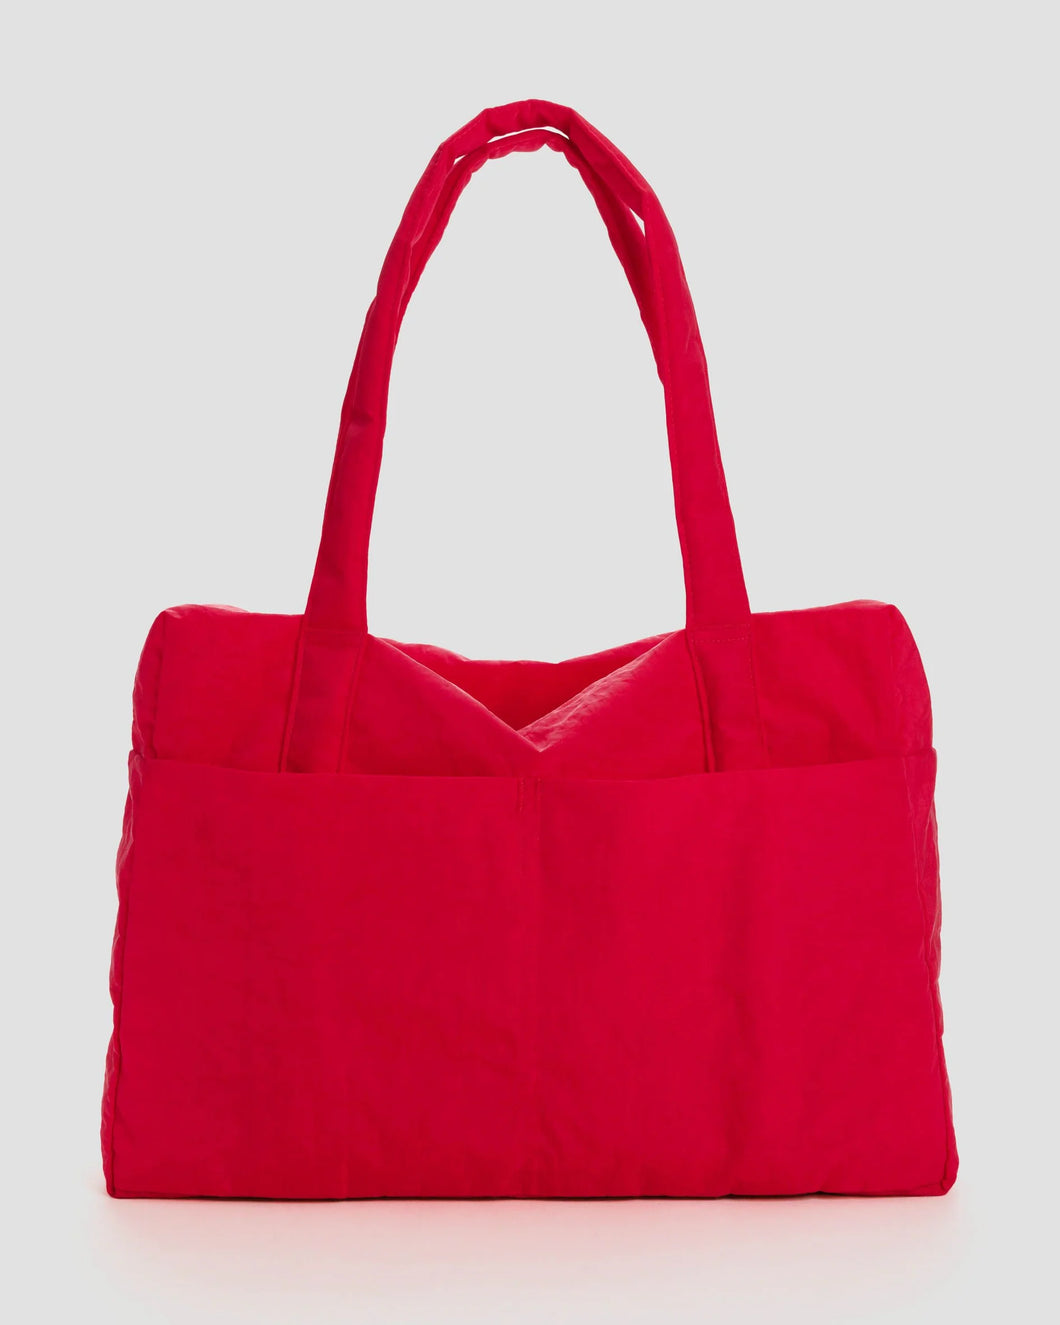 baggu - carry-on cloud bag - candy apple red